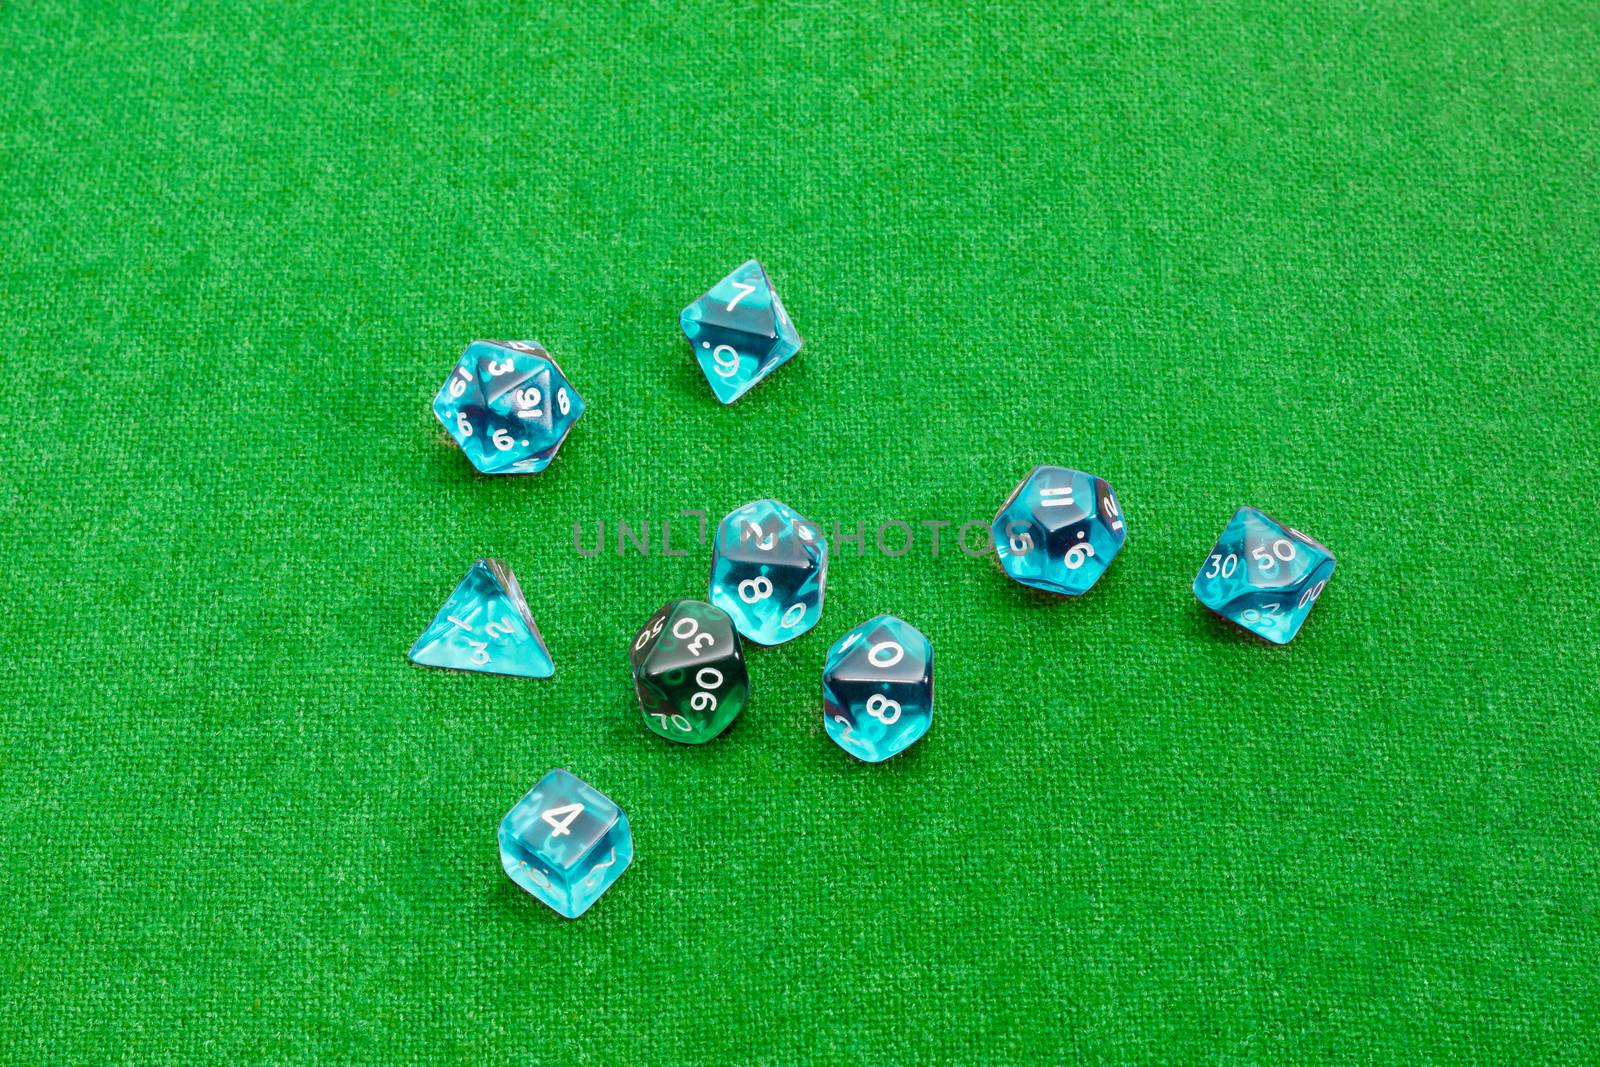 Specialized polyhedral dice for role-playing games on green clot by anmbph